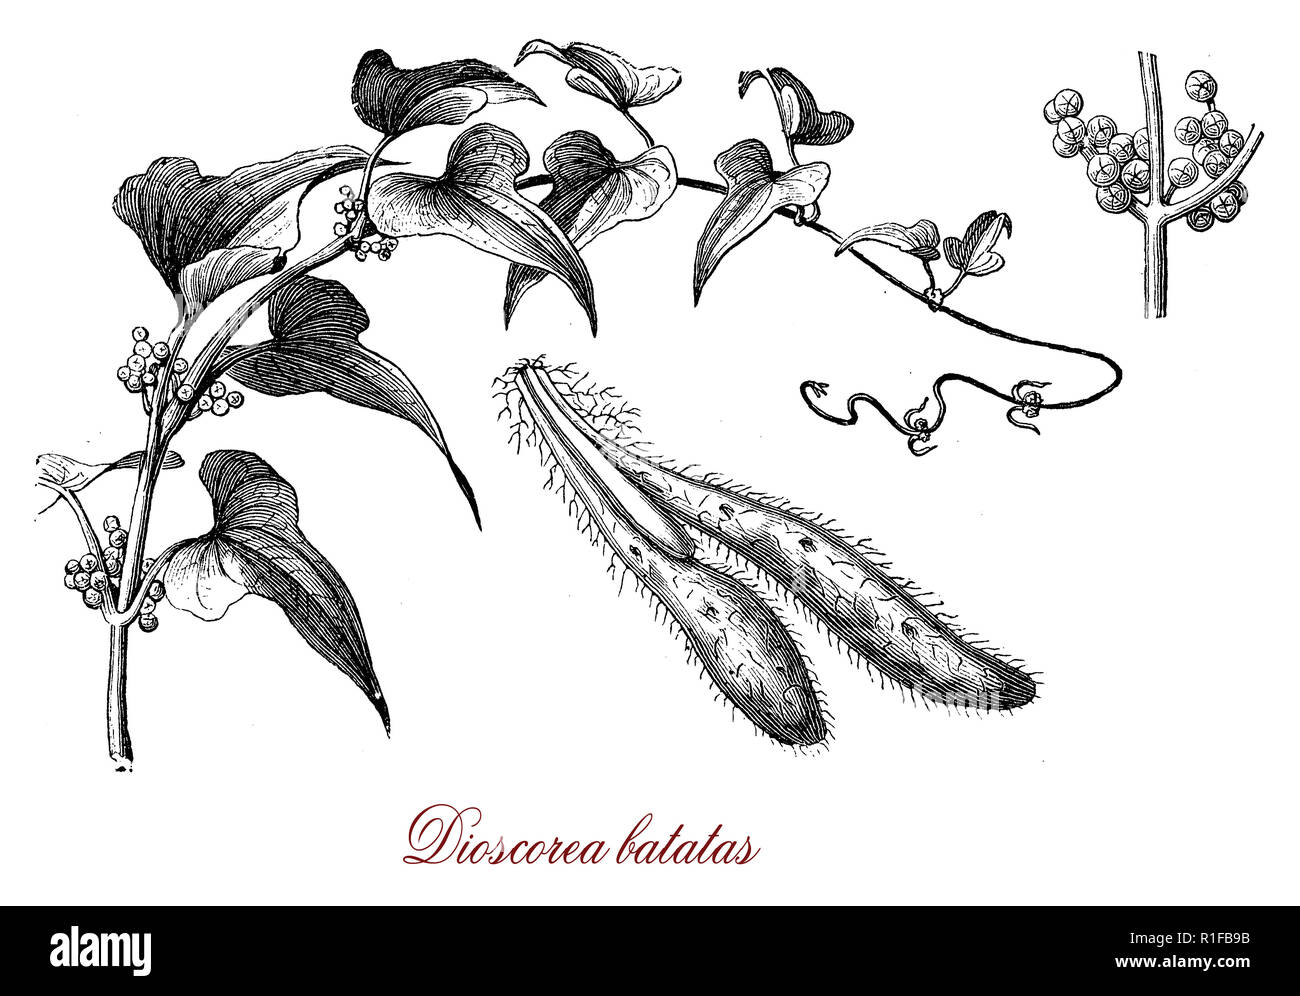 Vintage botanical engraving of Chinese wild yam, the flowers exude a rich Cinnamon fragrance, the tubers are edible Stock Photo